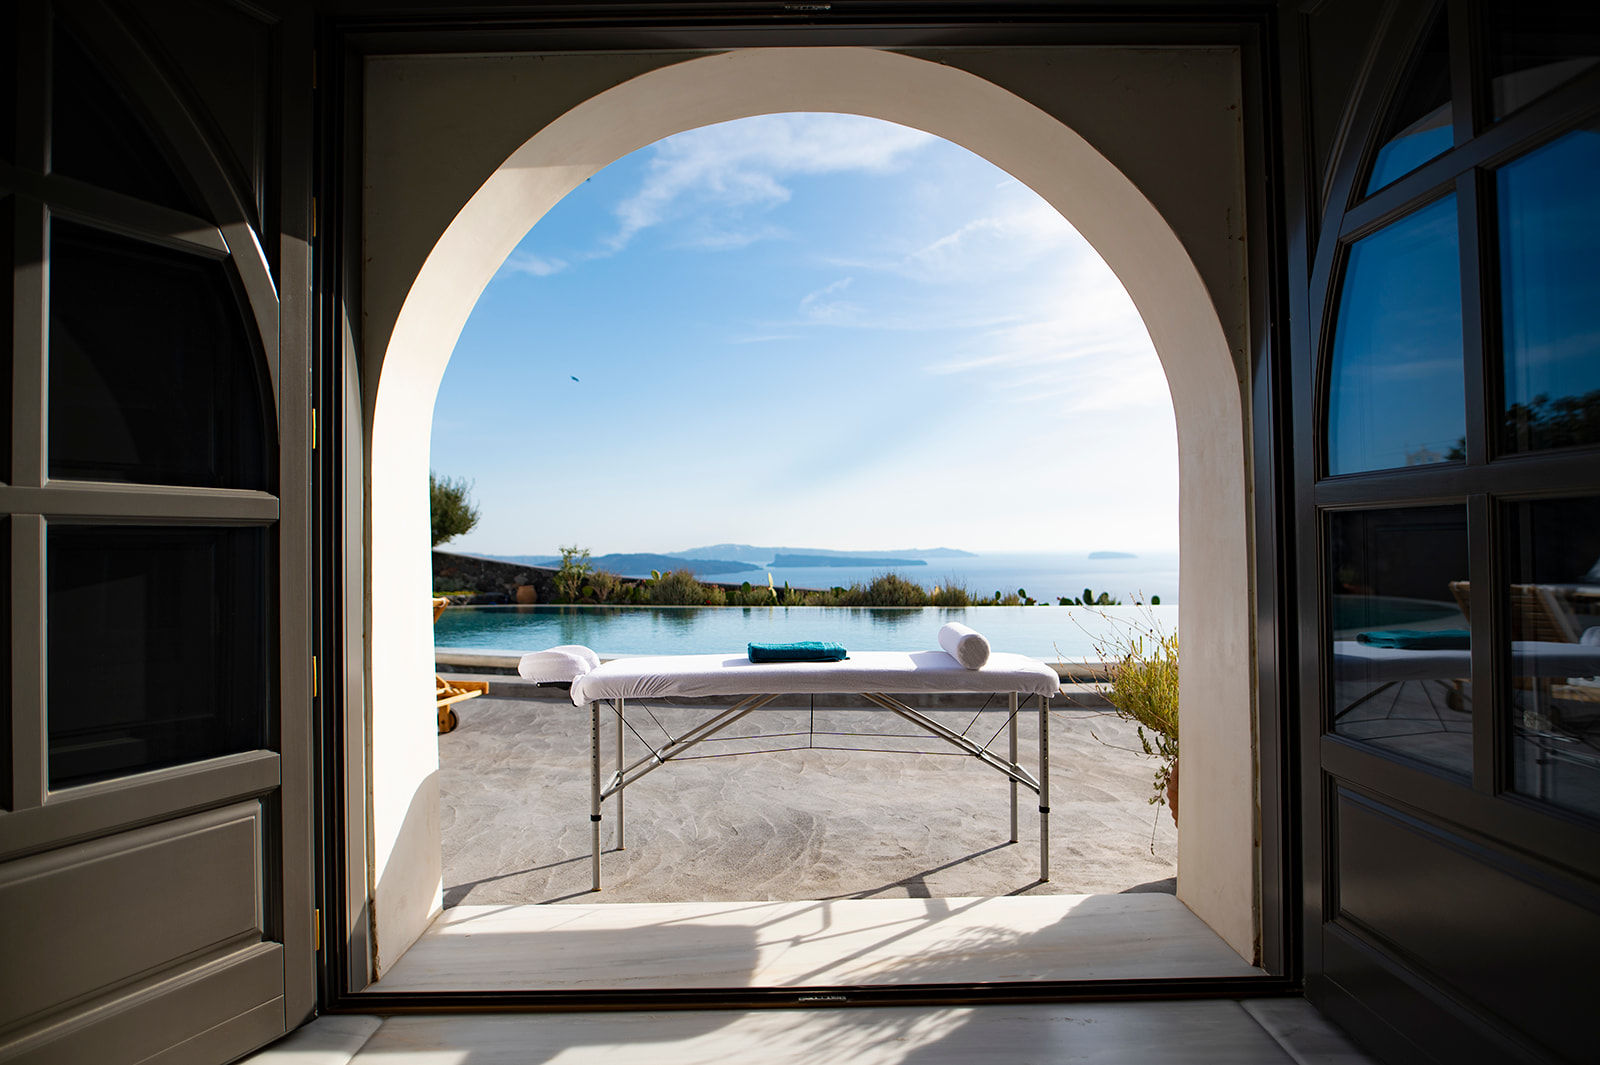 Massage table at a Santorini villa, setting the scene for a relaxing Anti Stress Massage Treatment by Soma Rei Wellness.